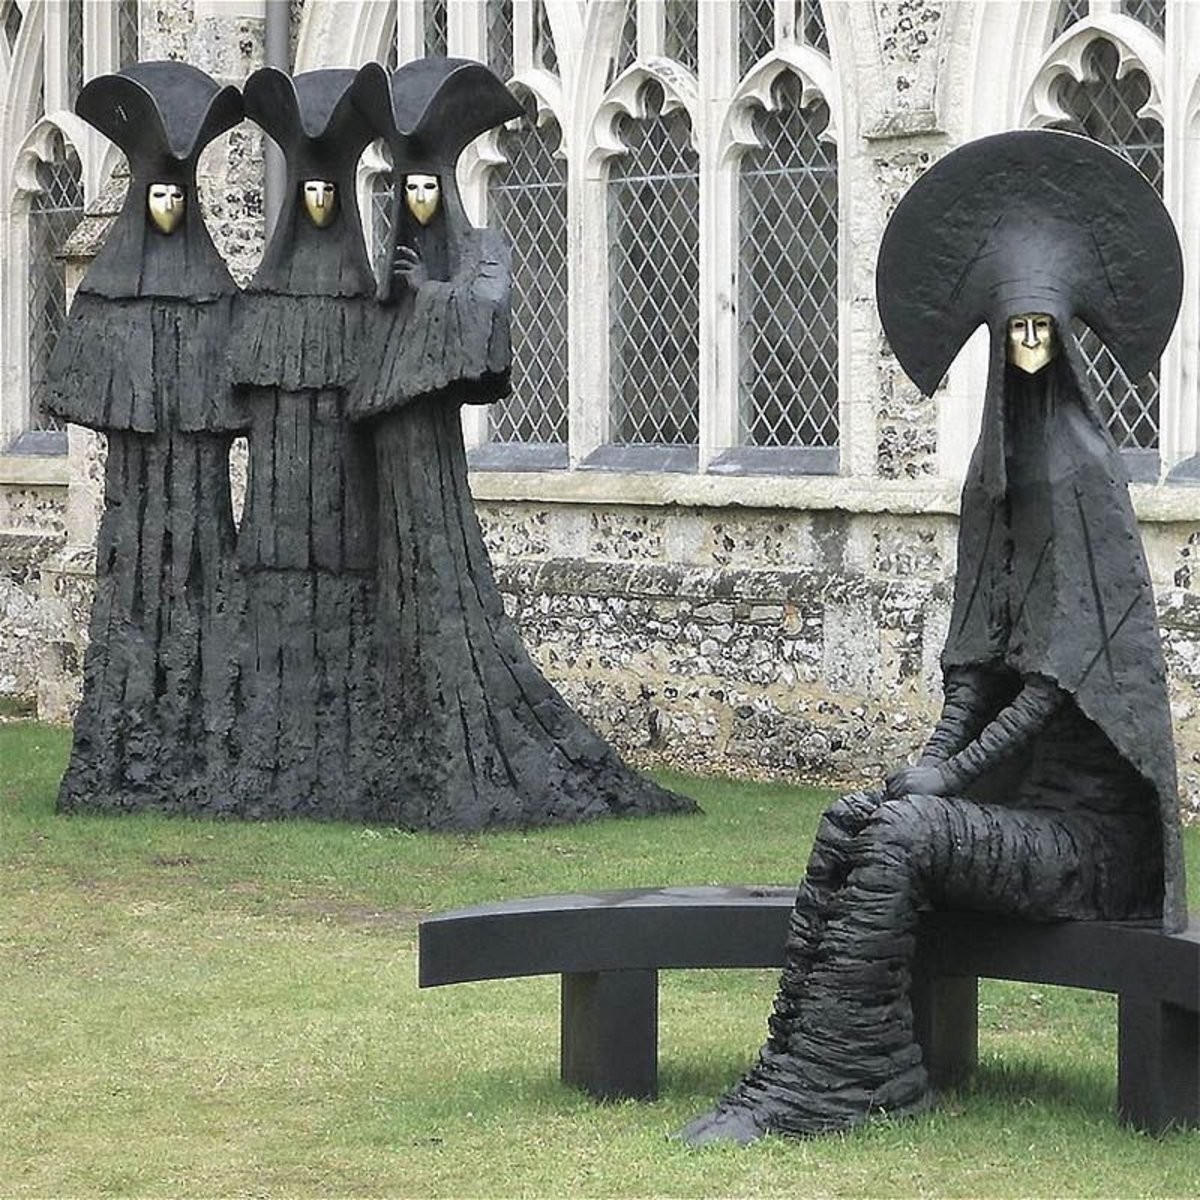 Works by Scottish sculptor, Philip Jackson.. .. What dark souls game is this from?